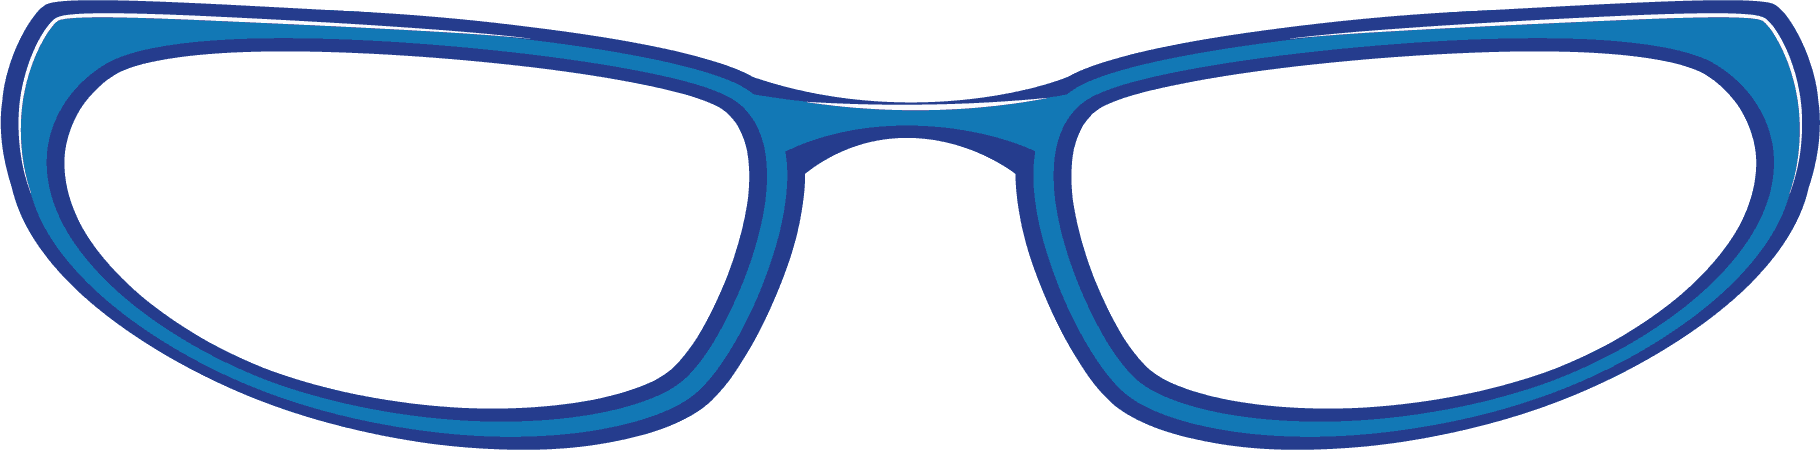 clipart for glasses - photo #36